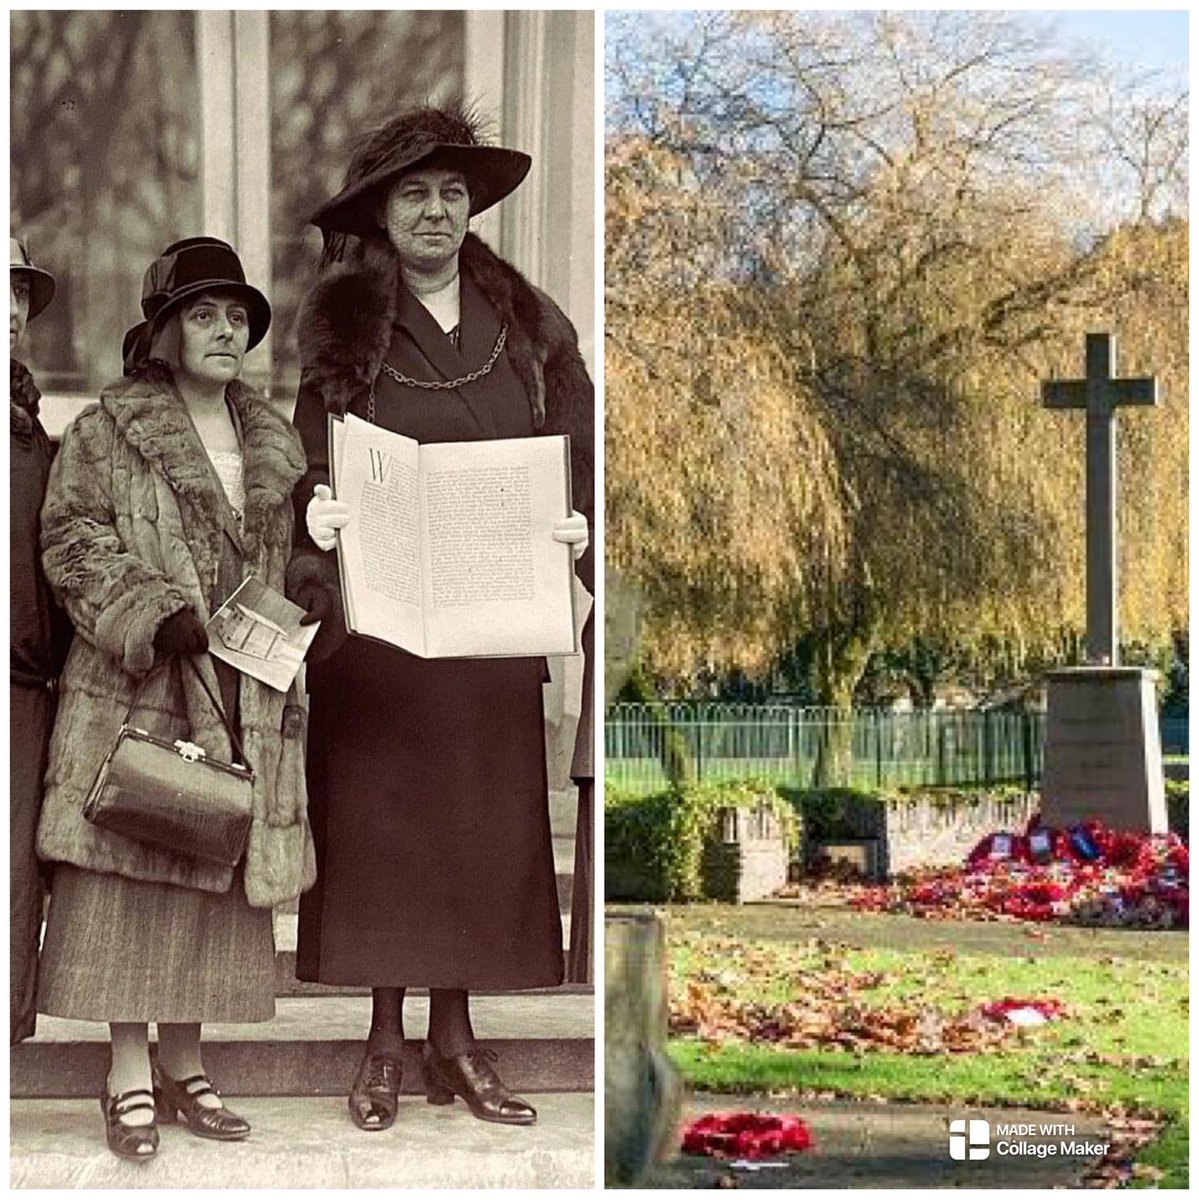 We’re welcoming anyone with a passion for research on 14th May as we investigate links between the names on our War Memorials and the Welsh Women’s Peace Petition. No experience needed – more info here orlo.uk/fV2lA